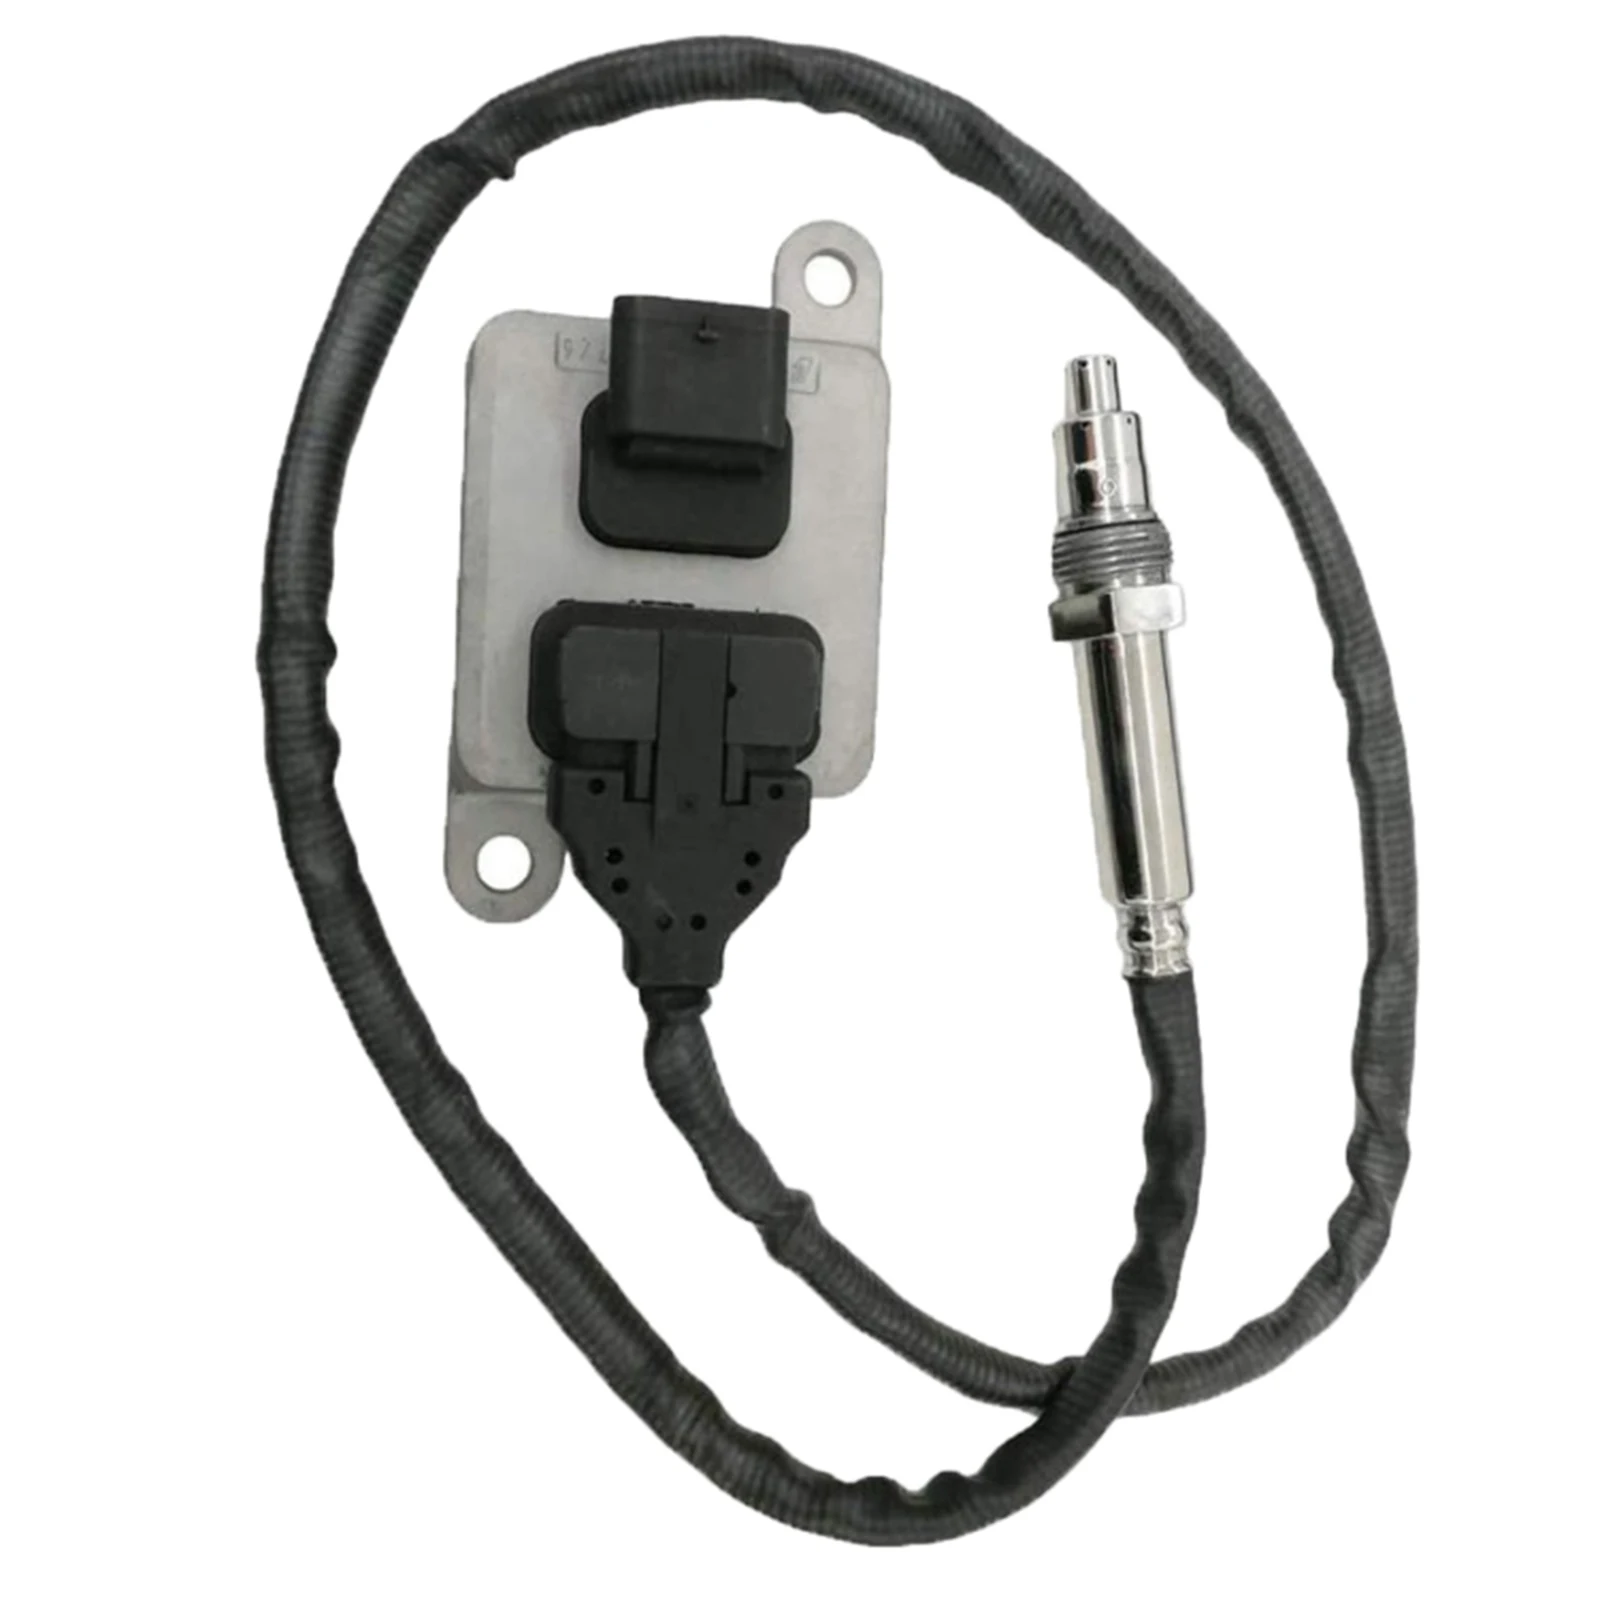 NOX Sensor Compatible with GL320 GL350 E250 ML320 ML350 Replacement Replace A-000-905-35-03 5WK9-6682D